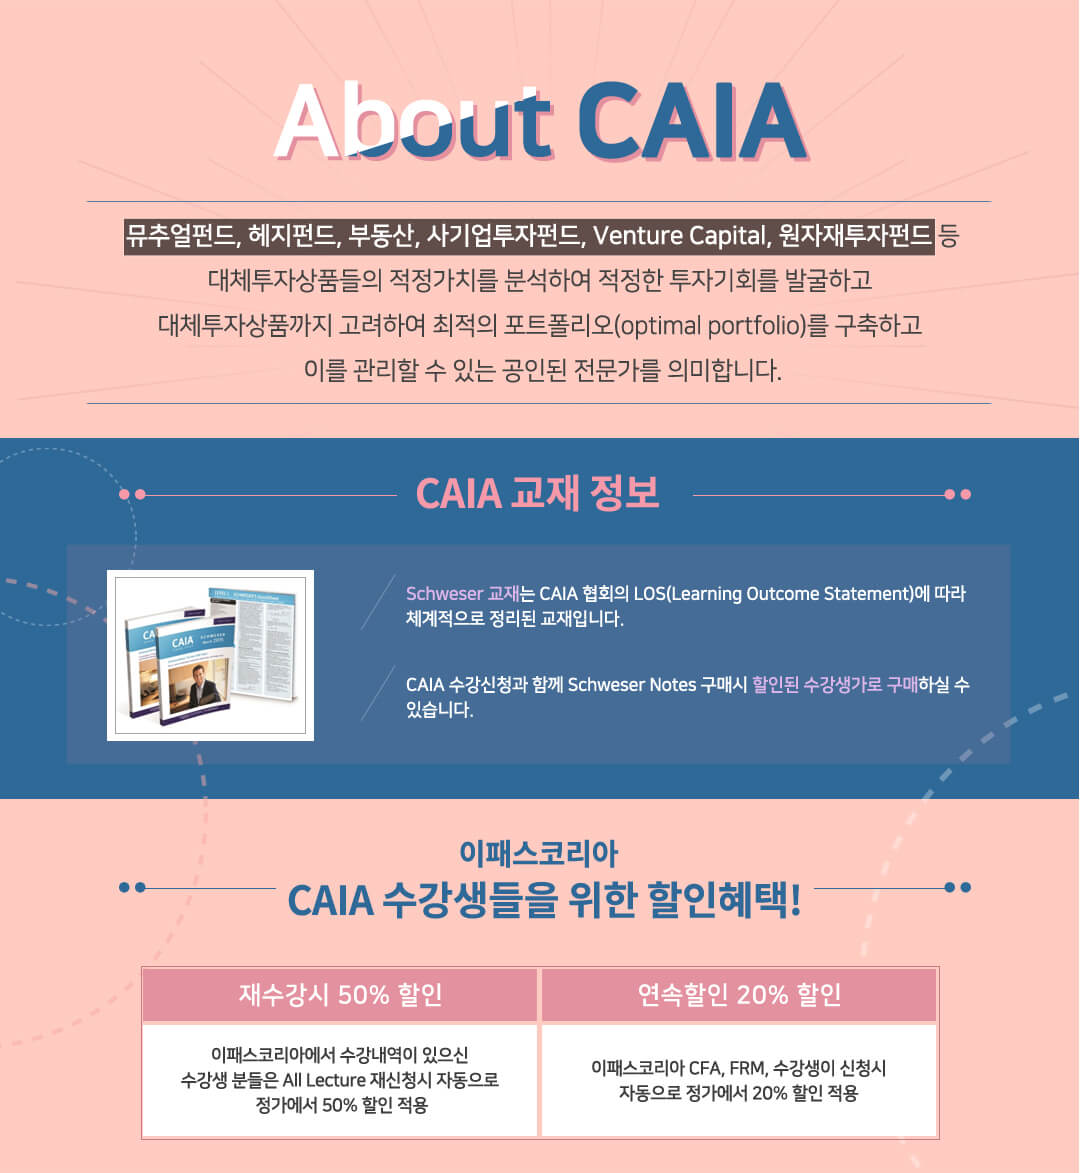 About CAIA